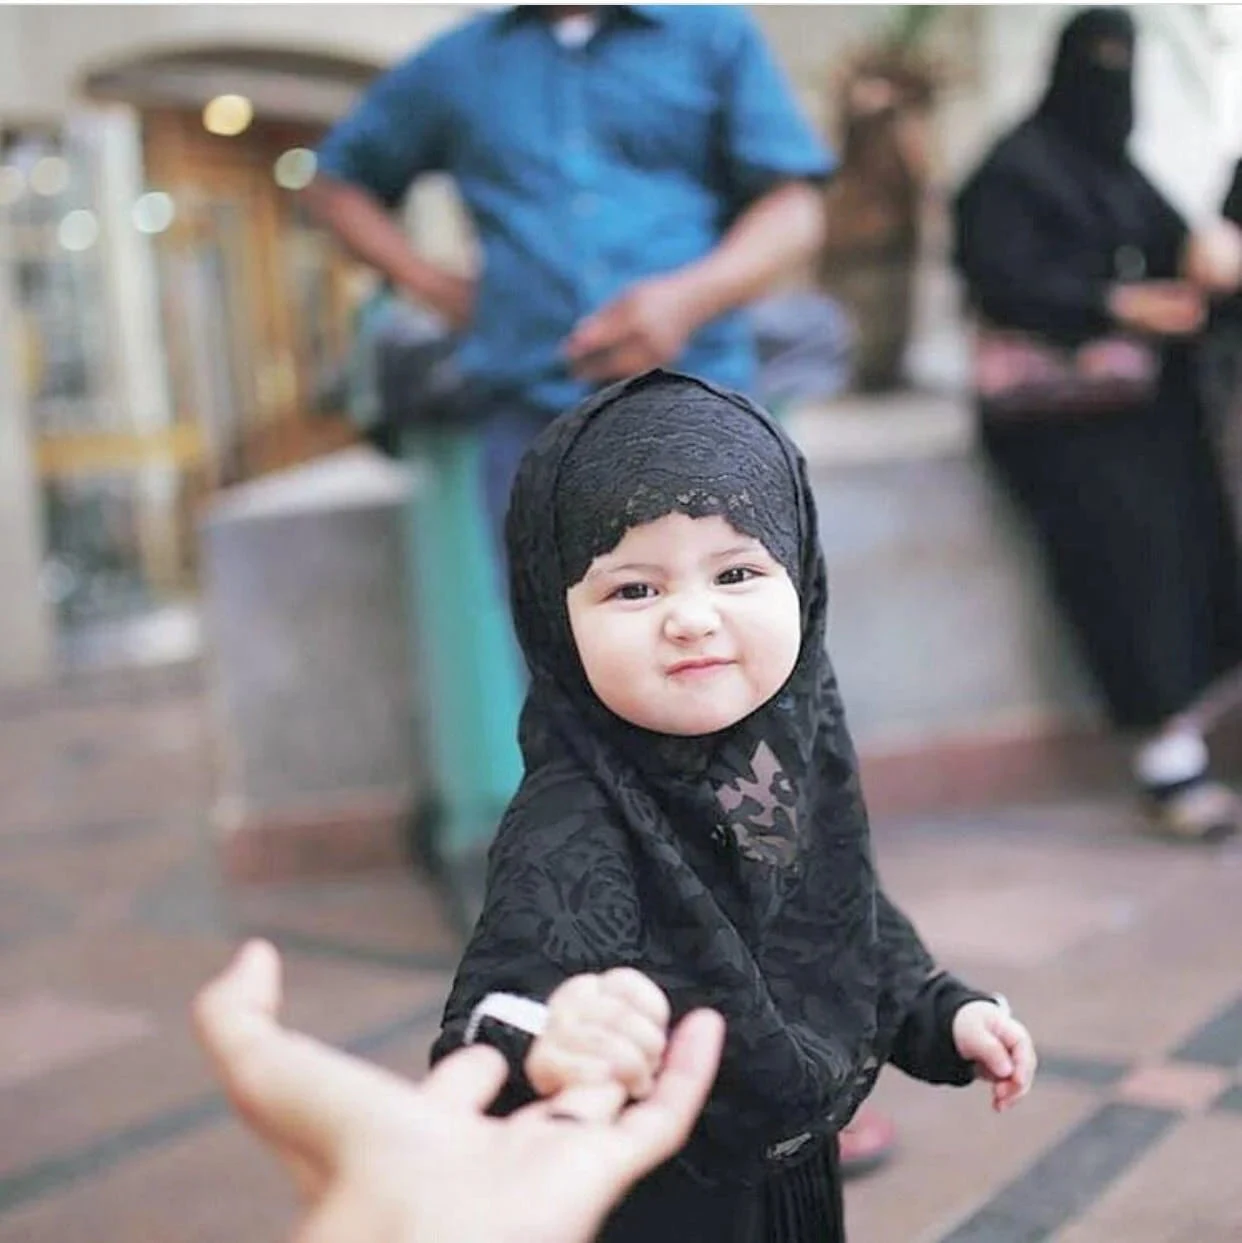 islamic cute baby pic download - islamic baby picture boy girl - islamic baby picture - islamic cute baby pic - NeotericIT.com